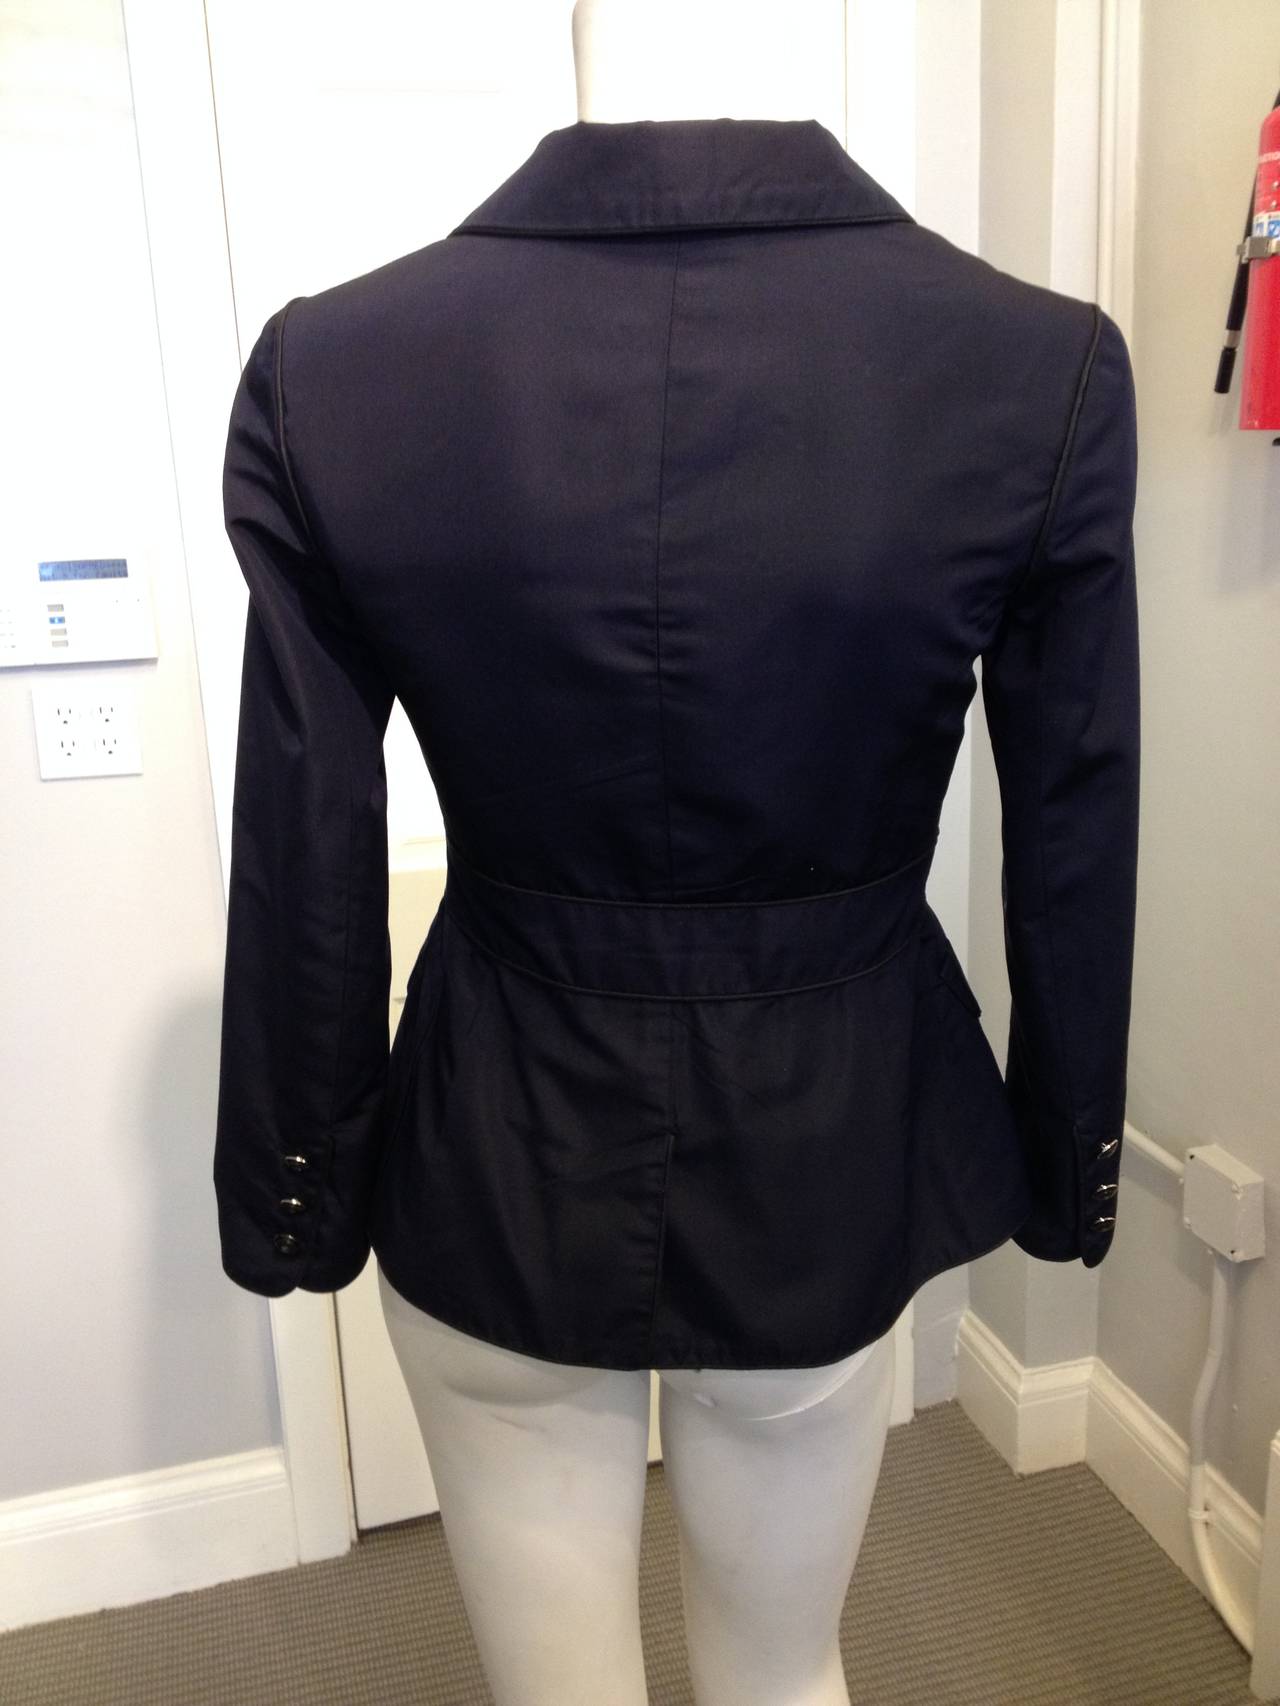 We love the simplicity of this beautiful jacket - from the 2007 Cruise collection, it's perfectly chie. The deep blue silk twill is trimmed with black piping along the seams for contrast and definition, while the four pockets add gamine Marine